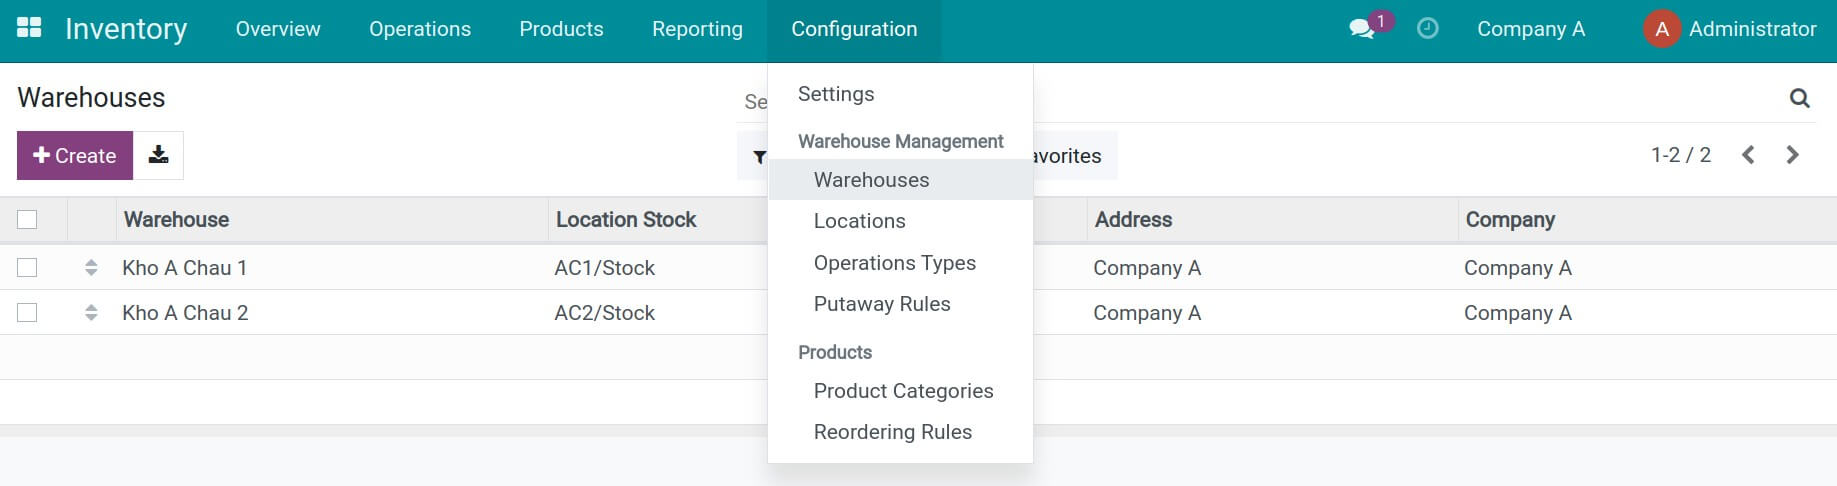 Set up multi-warehouses in Company A